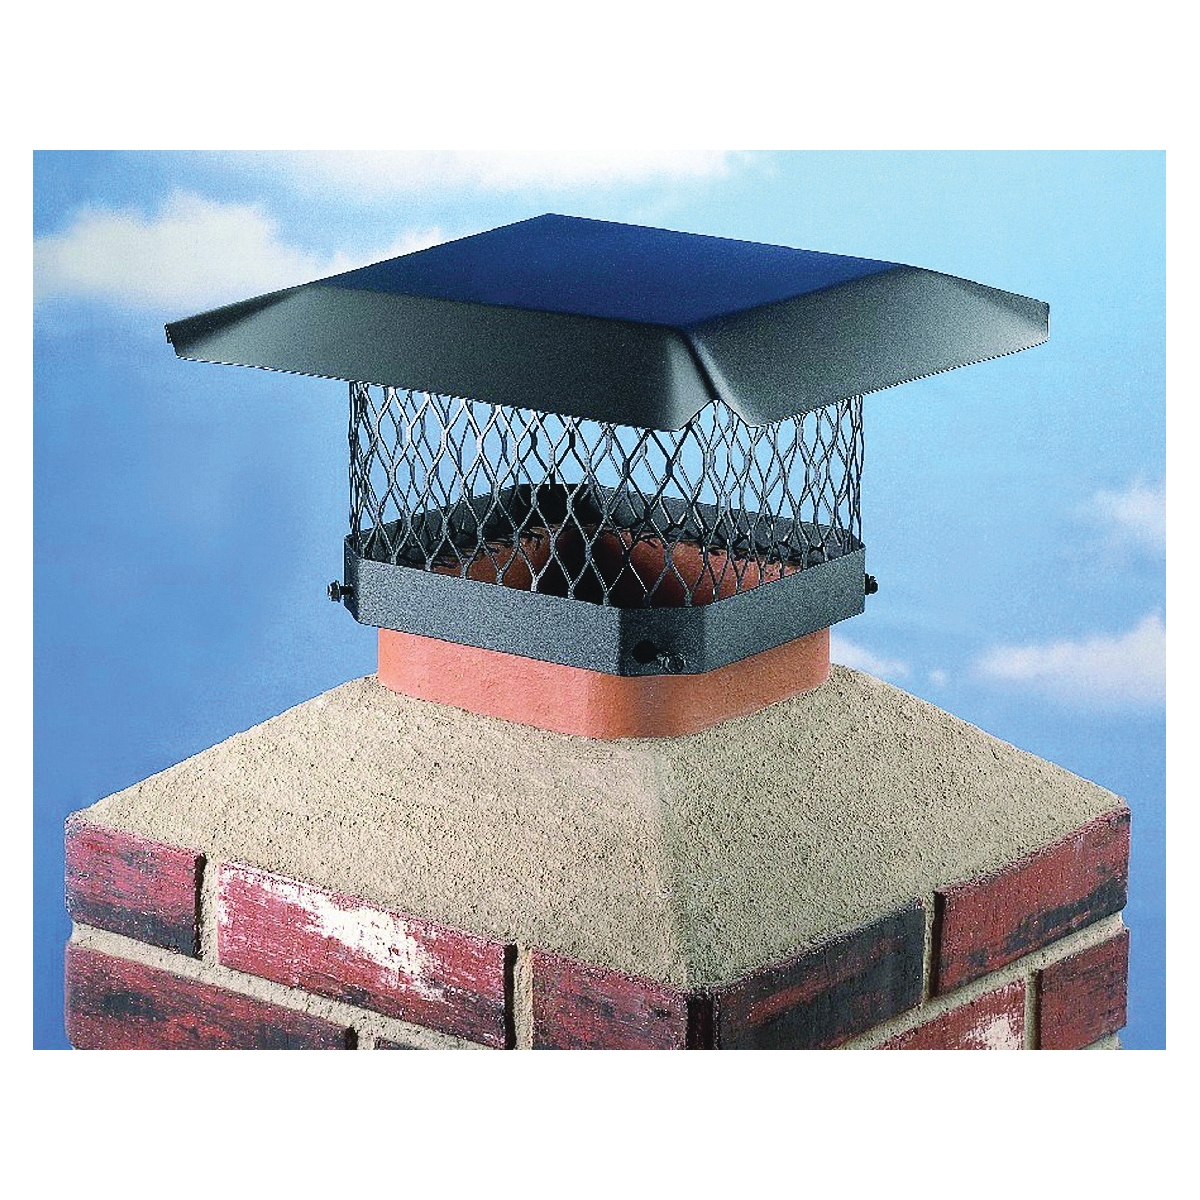 SC99 Shelter Chimney Cap, Steel, Black, Powder-Coated, Fits Duct Size: 7-1/2 x 7-1/2 to 9-1/2 x 9-1/2 in